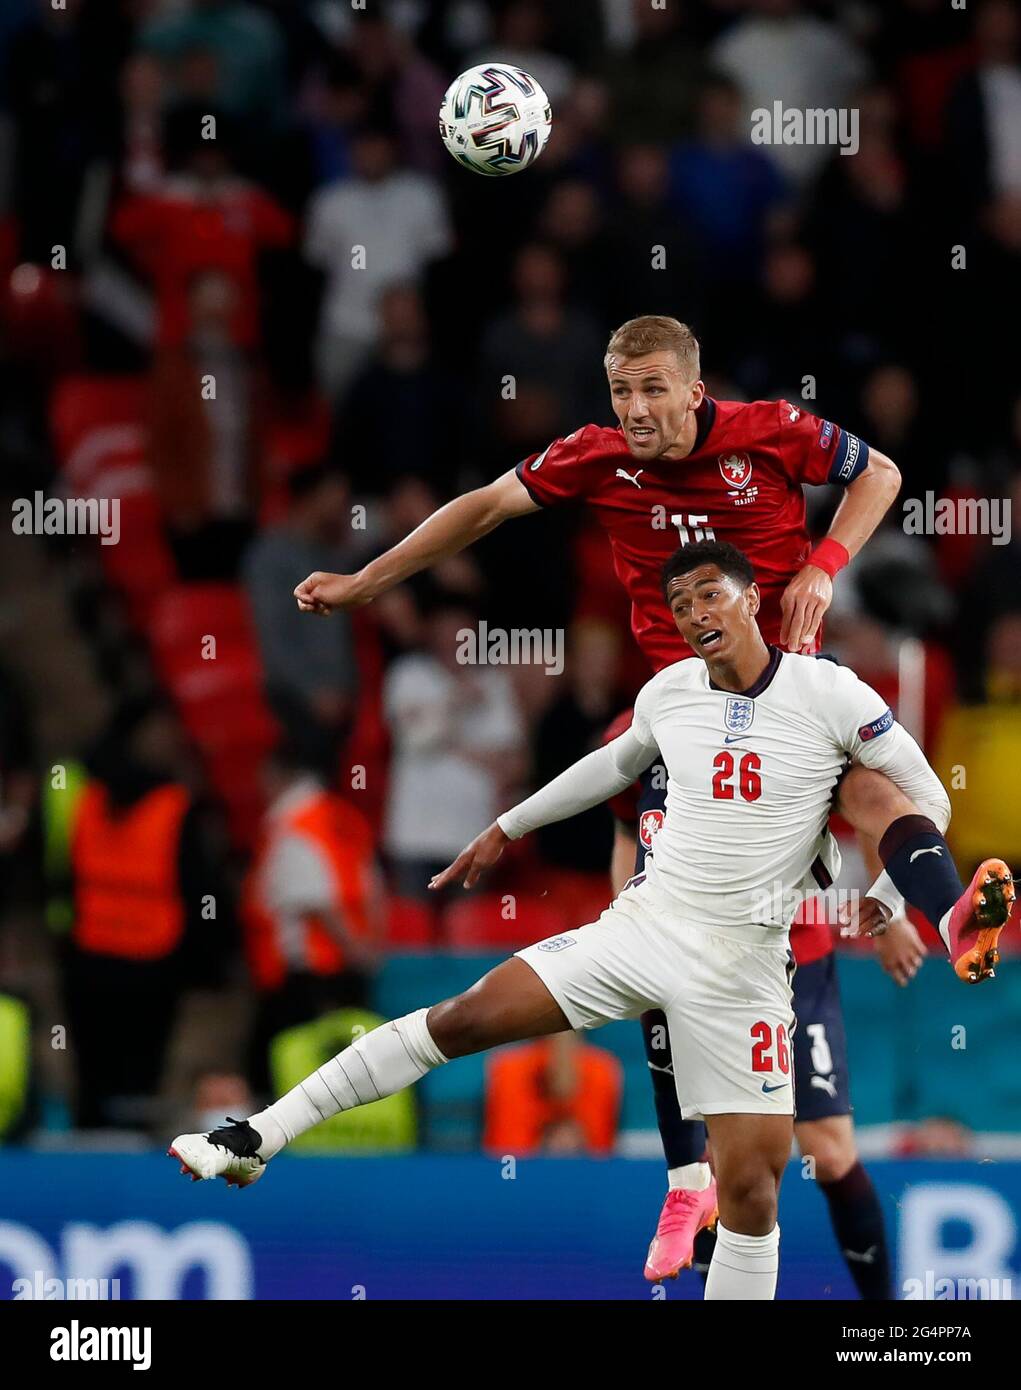 London, Britain. 22nd June, 2021. England's Jude Bellingham (bottom) vies with Czech Republic's Tomas Soucek during the Group D match between England and the Czech Republic at the UEFA EURO 2020 in London, Britain, on June 22, 2021. Credit: Han Yan/Xinhua/Alamy Live News Stock Photo